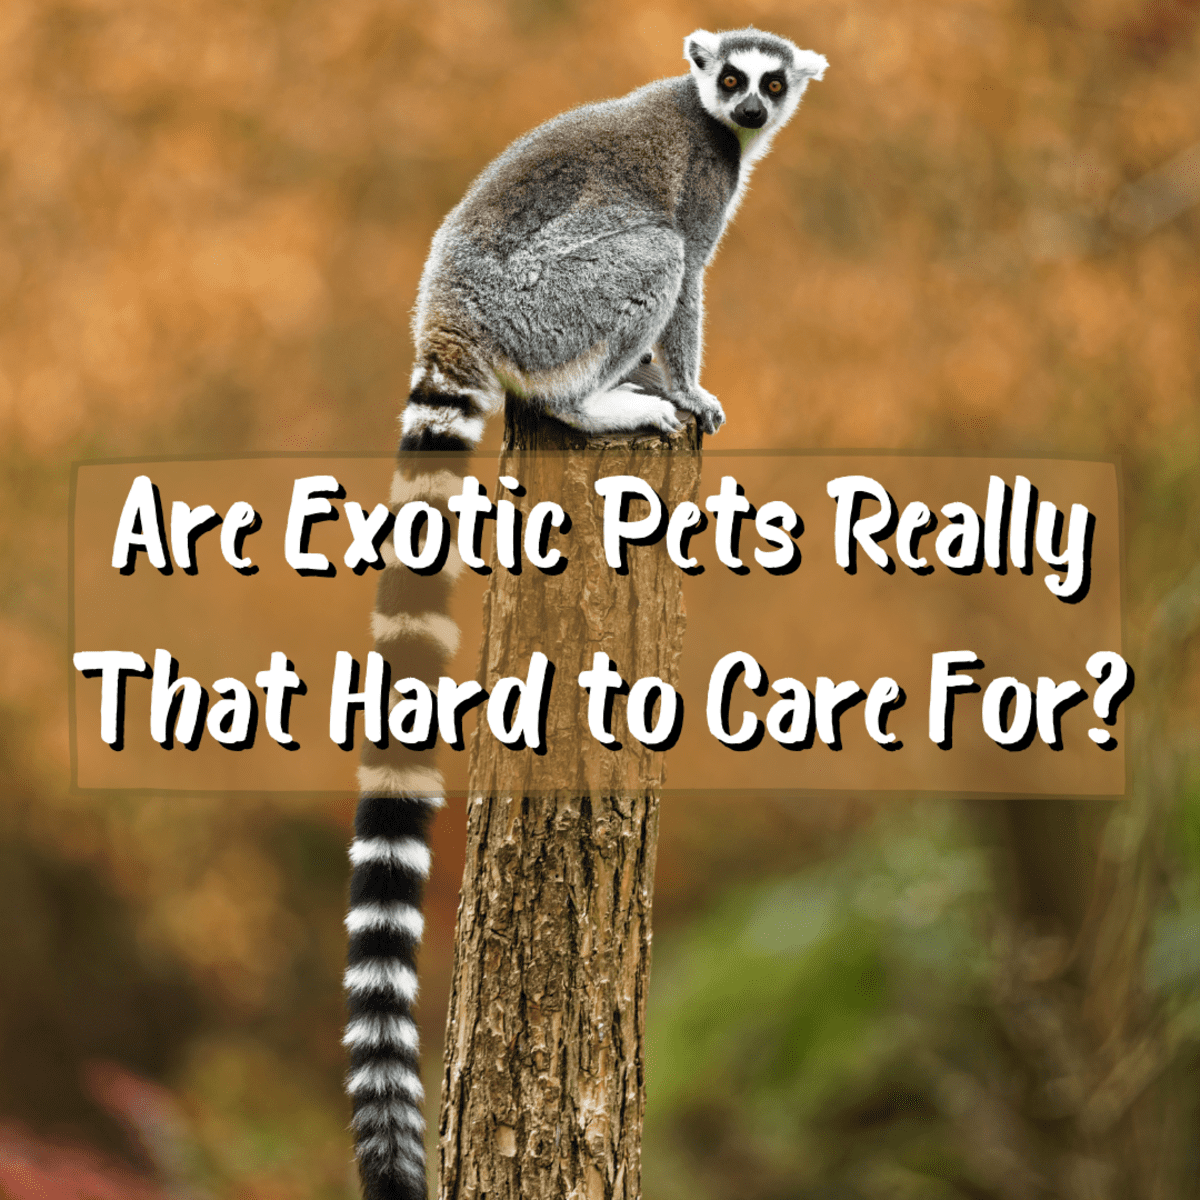 Exotic Pets: Are They Hard to Care For? - PetHelpful